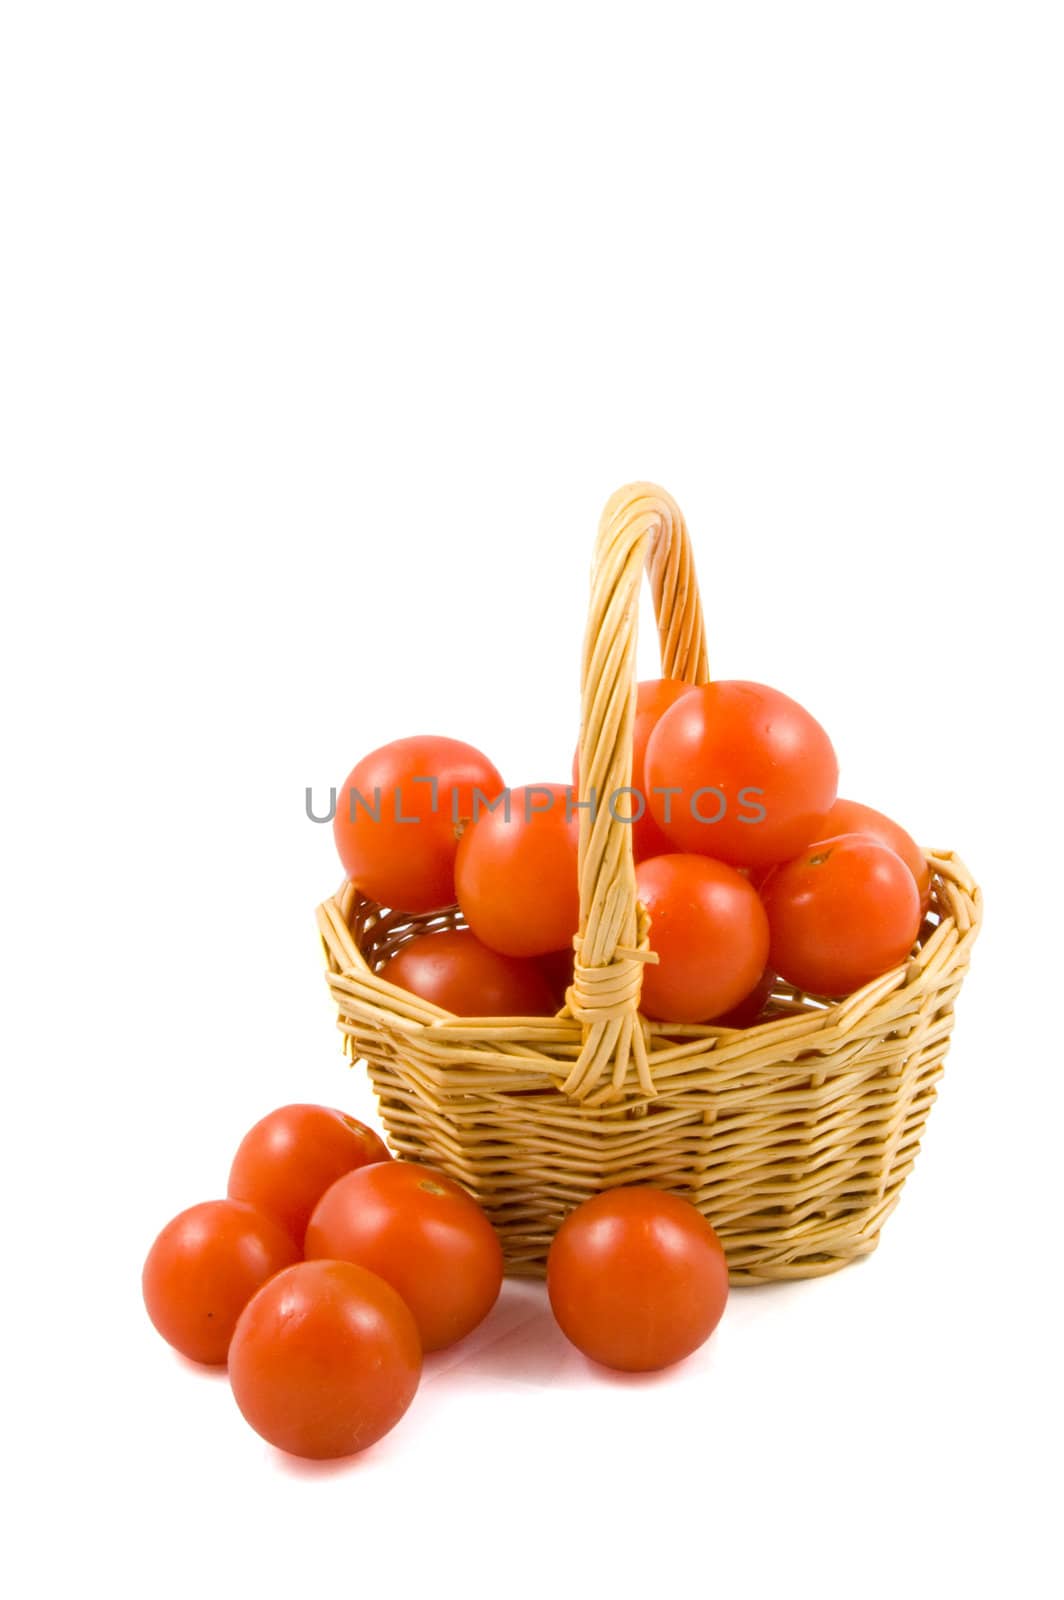 cherry berr ytomatoes in a wicket isolated on white background